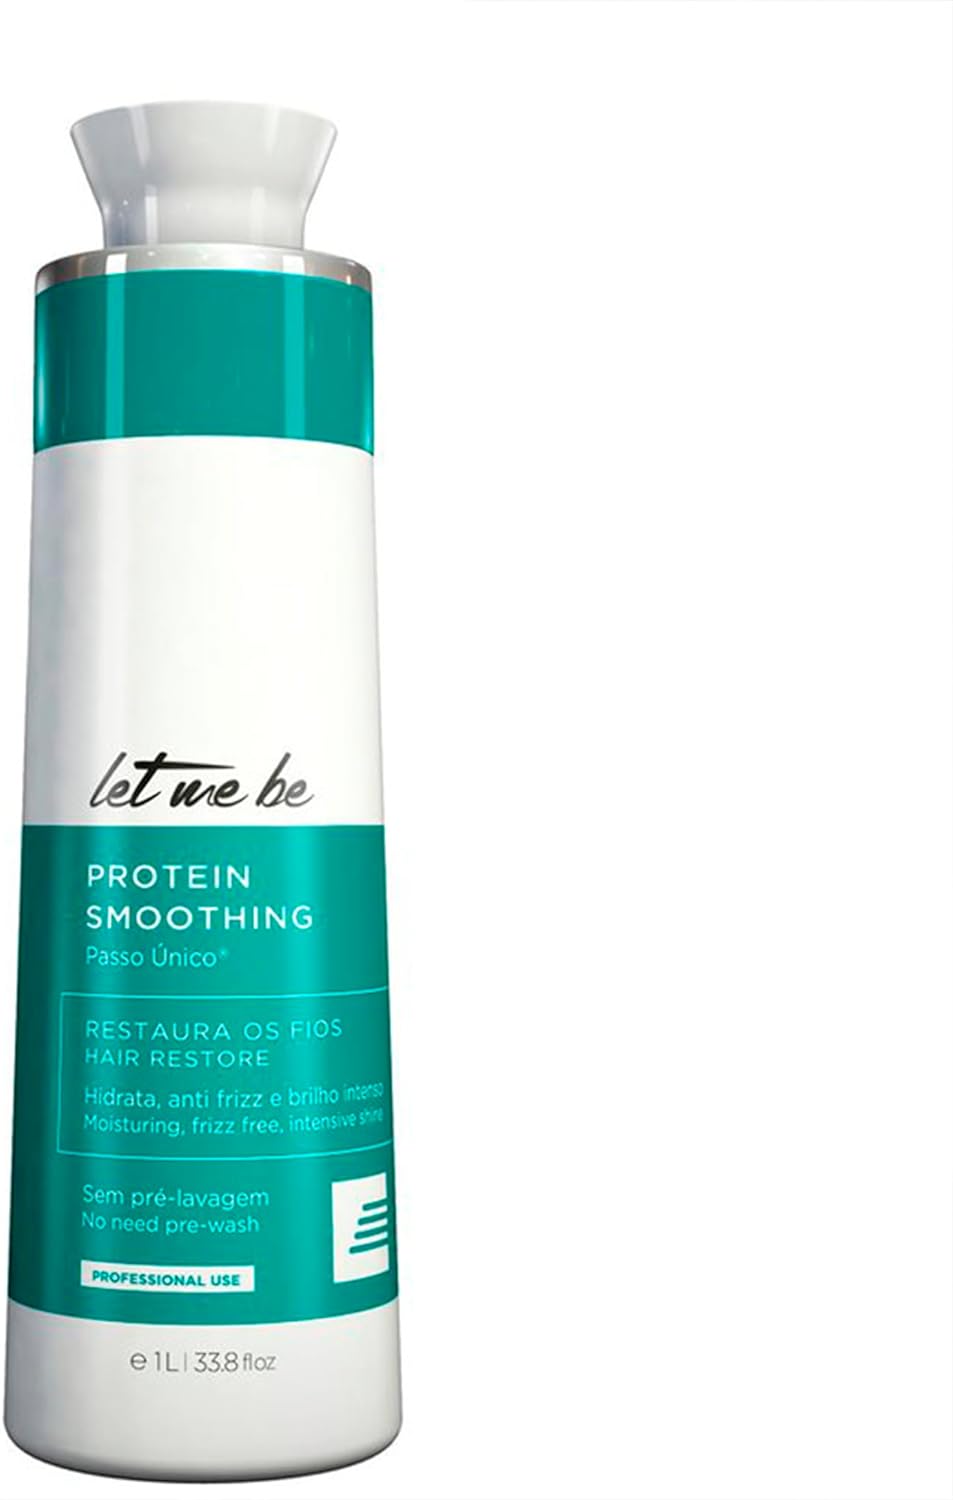 Let me be, Protein Smoothing, Restoring Conditioner For Hair, 1L 33.8fl.oz